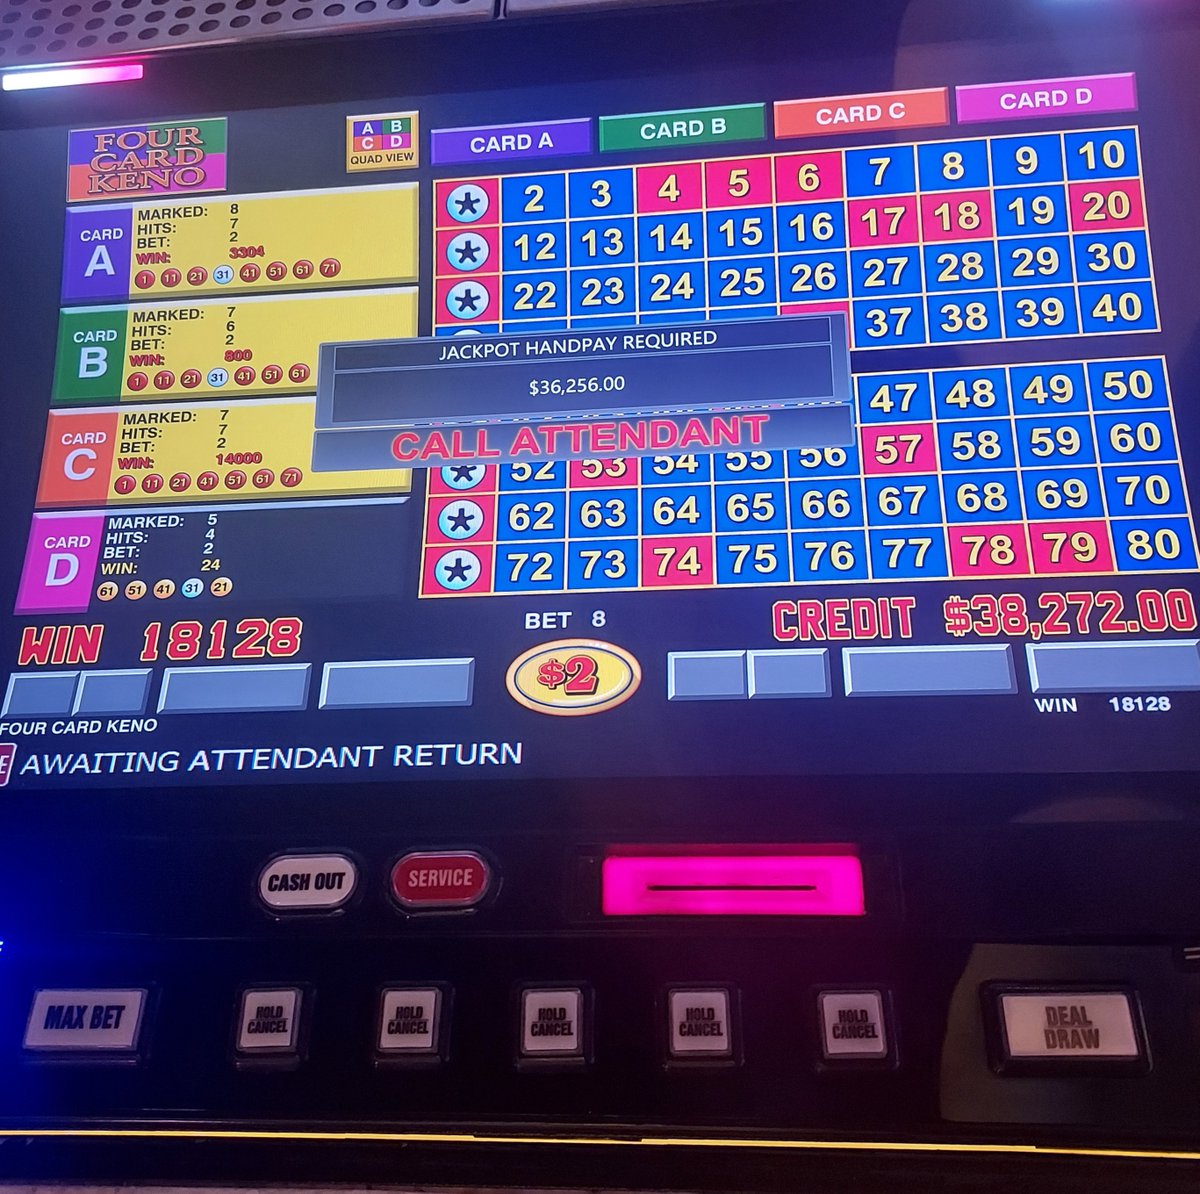 Nothing better than betting $16 on 4 Card Keno and getting a $36,256 cashpay by the casino ✌️ 💸